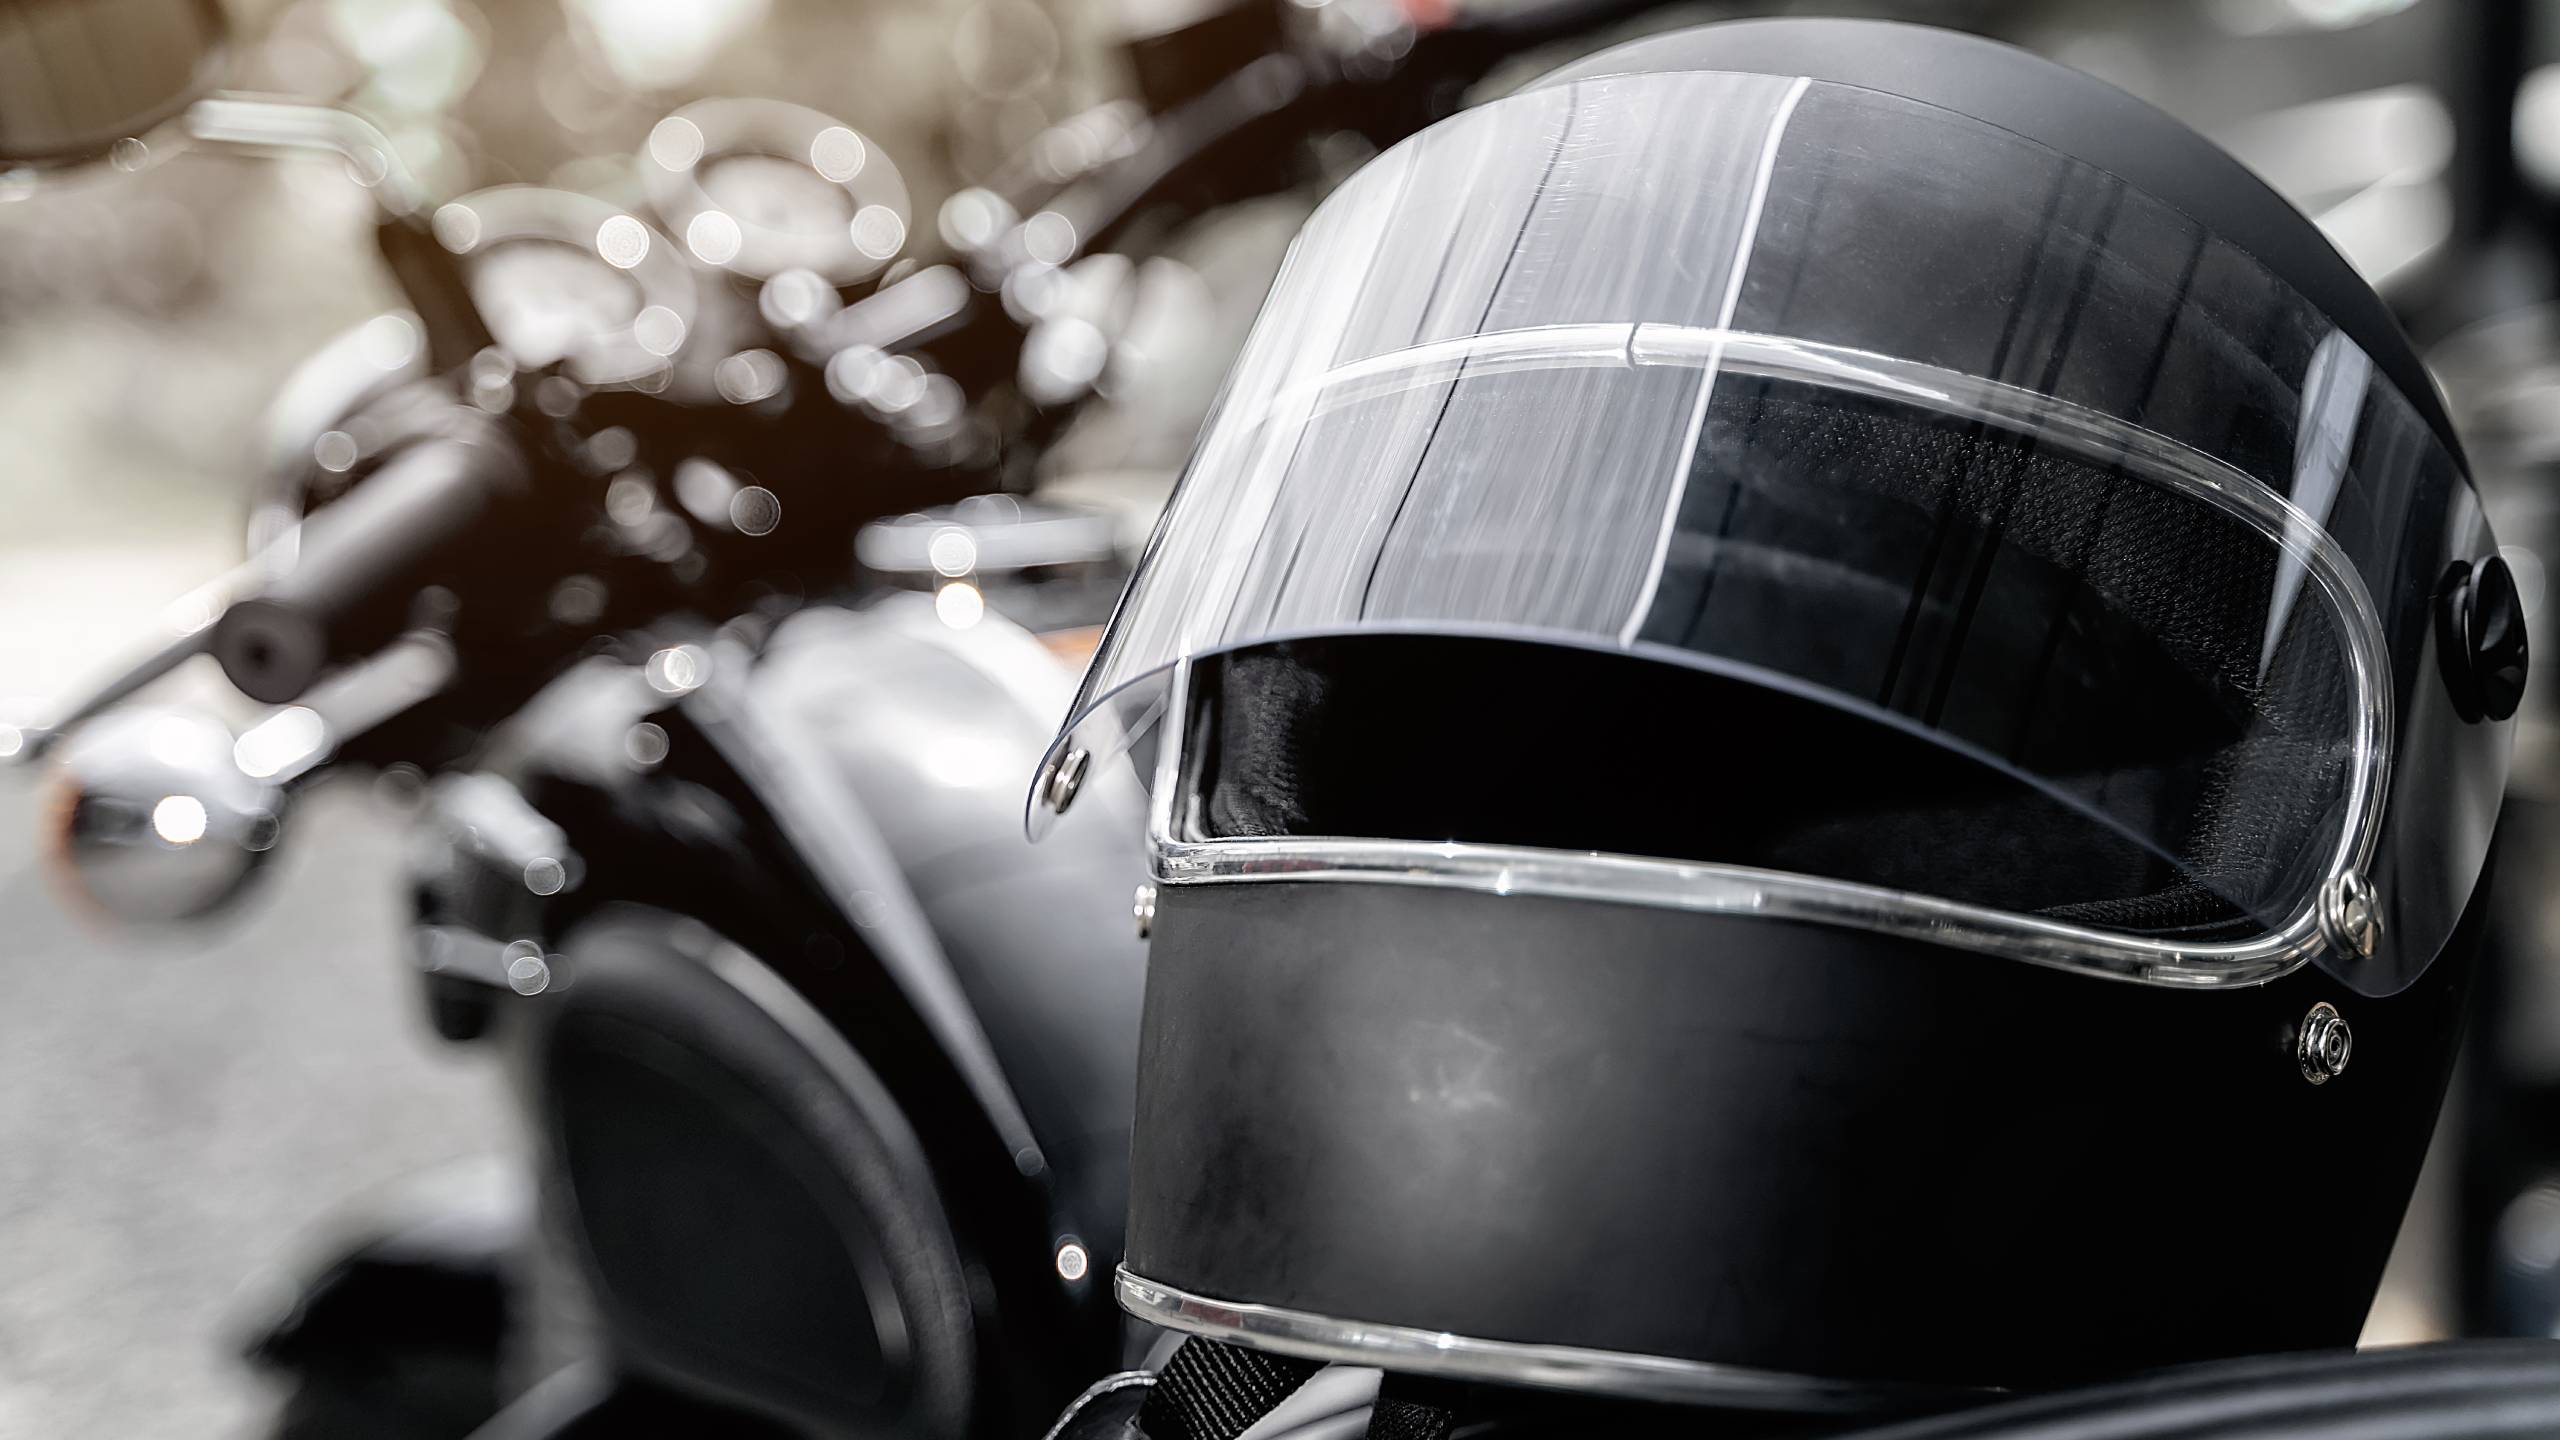 Illinois Motorcycle Helmet Law: What Are the Details?